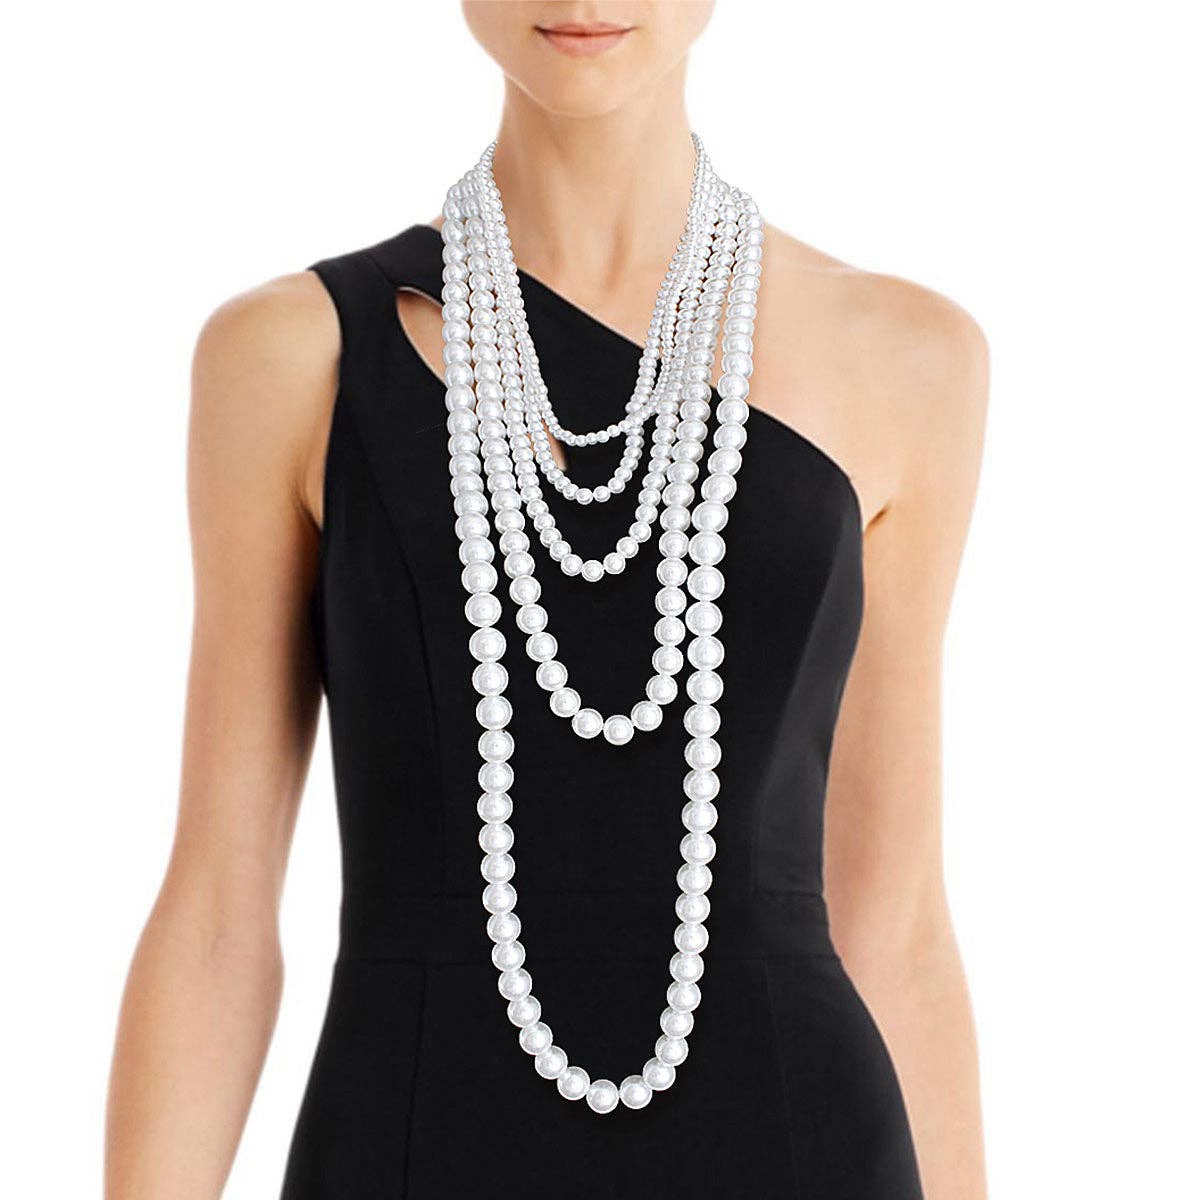 Pearly Long 5 Strand White Pearl Set: 24 inches / White / Rhodium